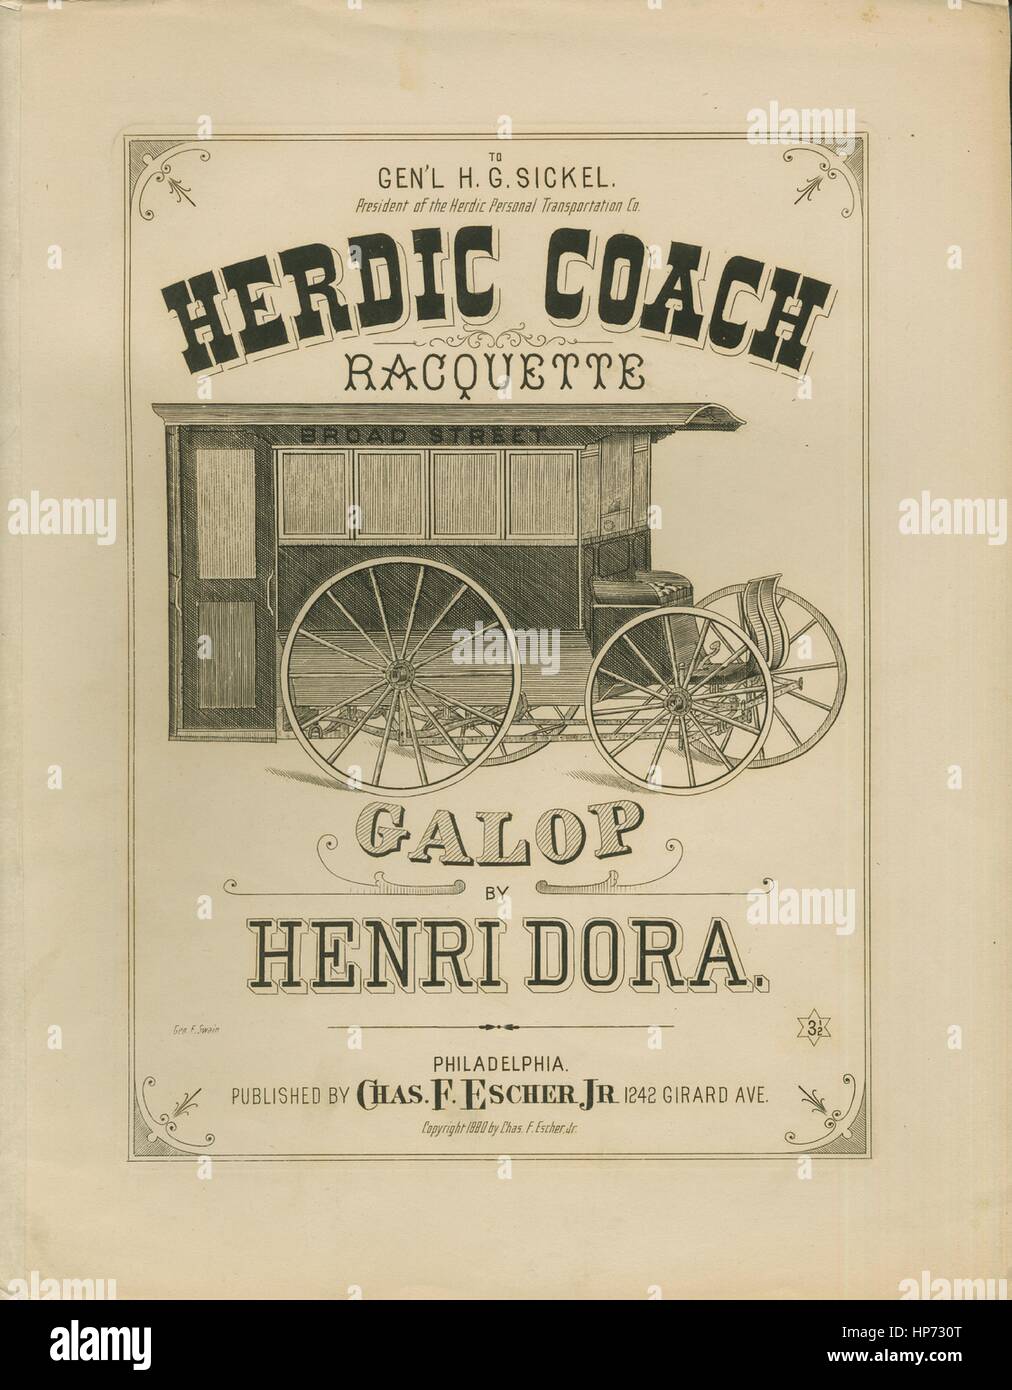 Sheet music cover image of the song 'Herdic Coach Racquette Galop', with original authorship notes reading 'By Henri Dora', United States, 1880. The publisher is listed as 'Chas. F. Escher, Jr., 1242 Girard Ave.', the form of composition is 'da capo with trio', the instrumentation is 'piano', the first line reads 'None', and the illustration artist is listed as 'Geo. F. Swain'. Stock Photo